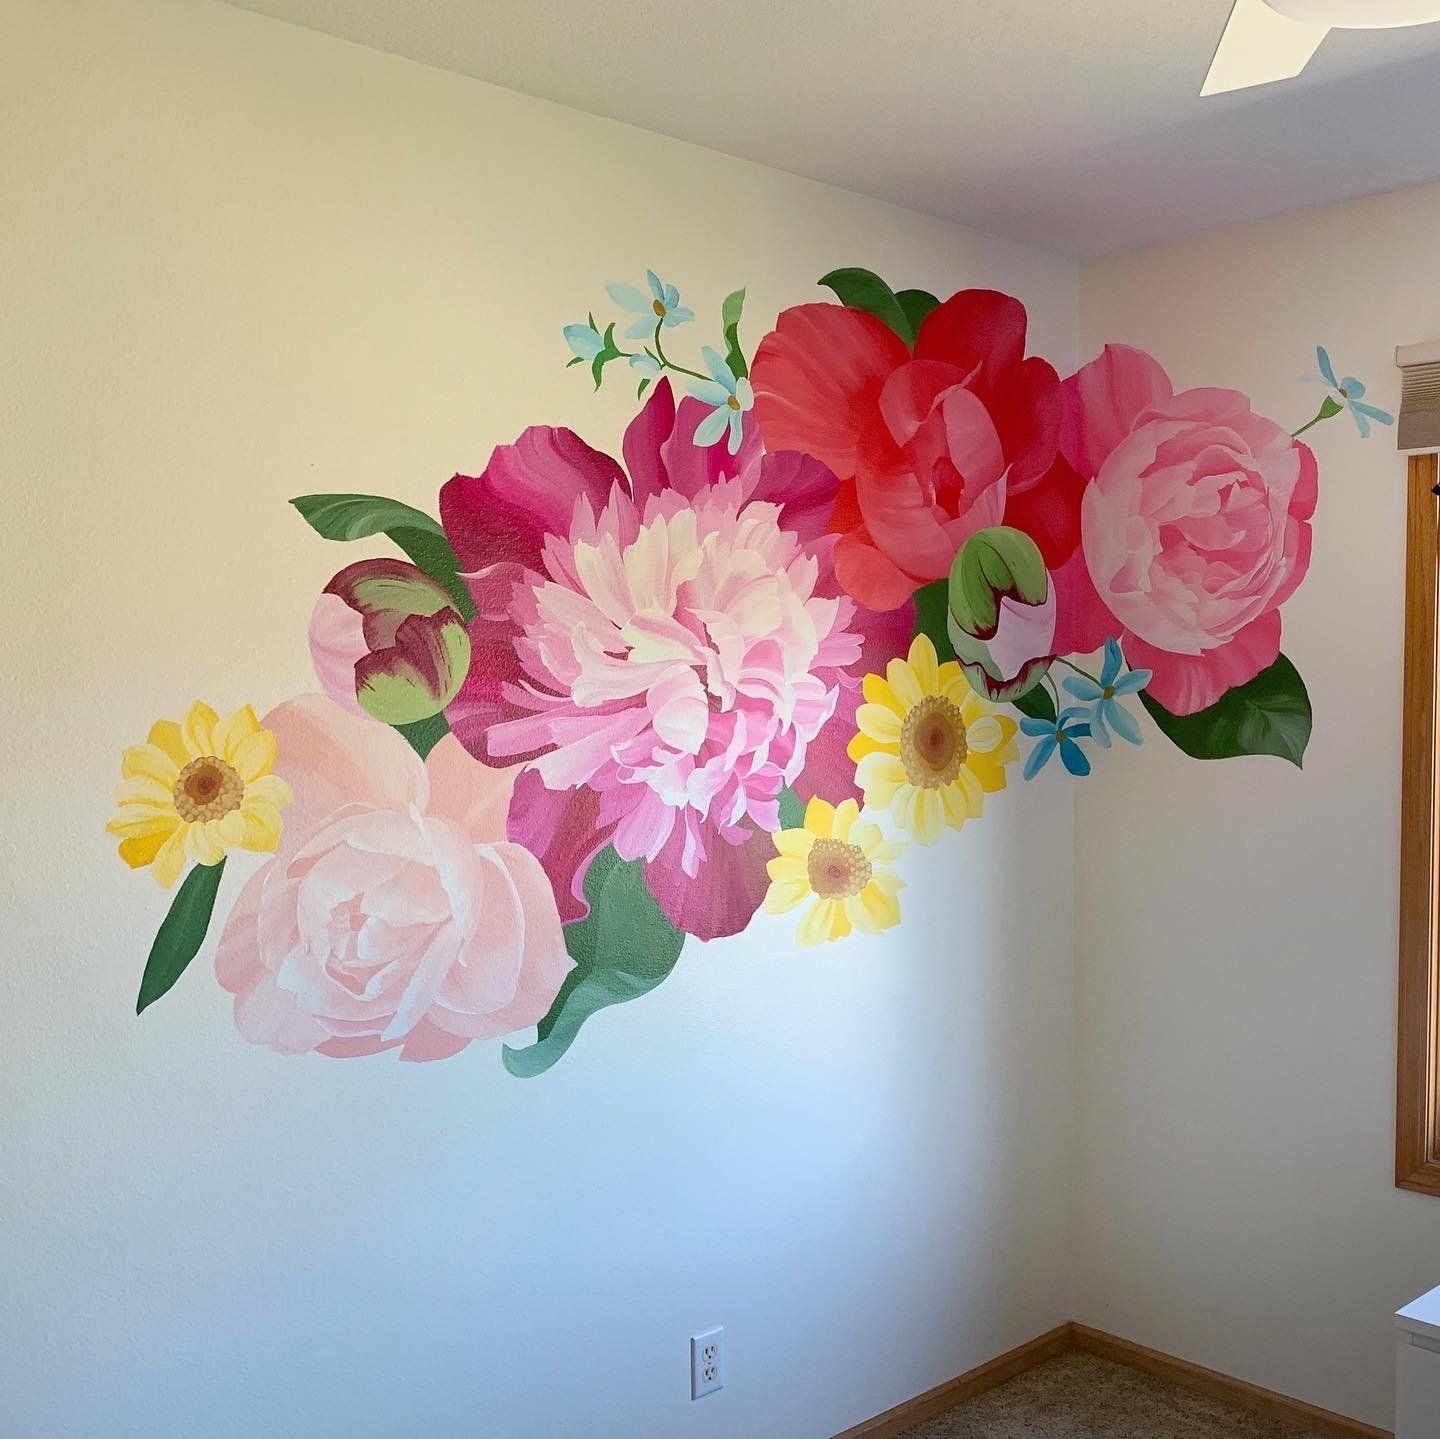 Jenna's digital mock-up come to life on an interior mural wall